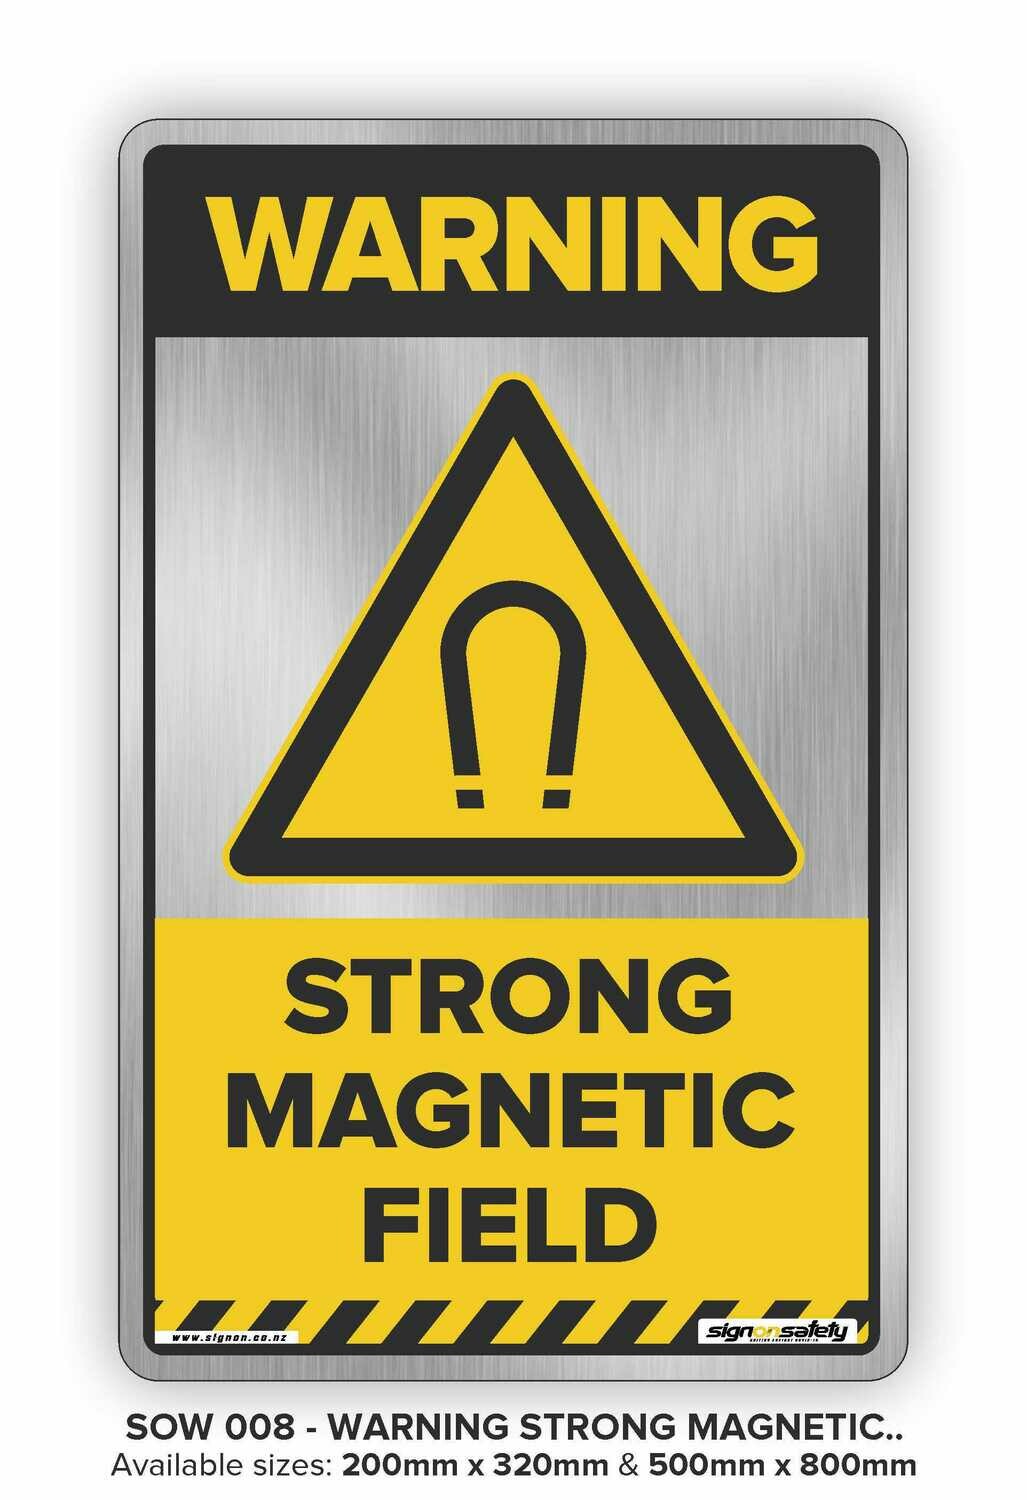 Warning - Strong Magnetic Field